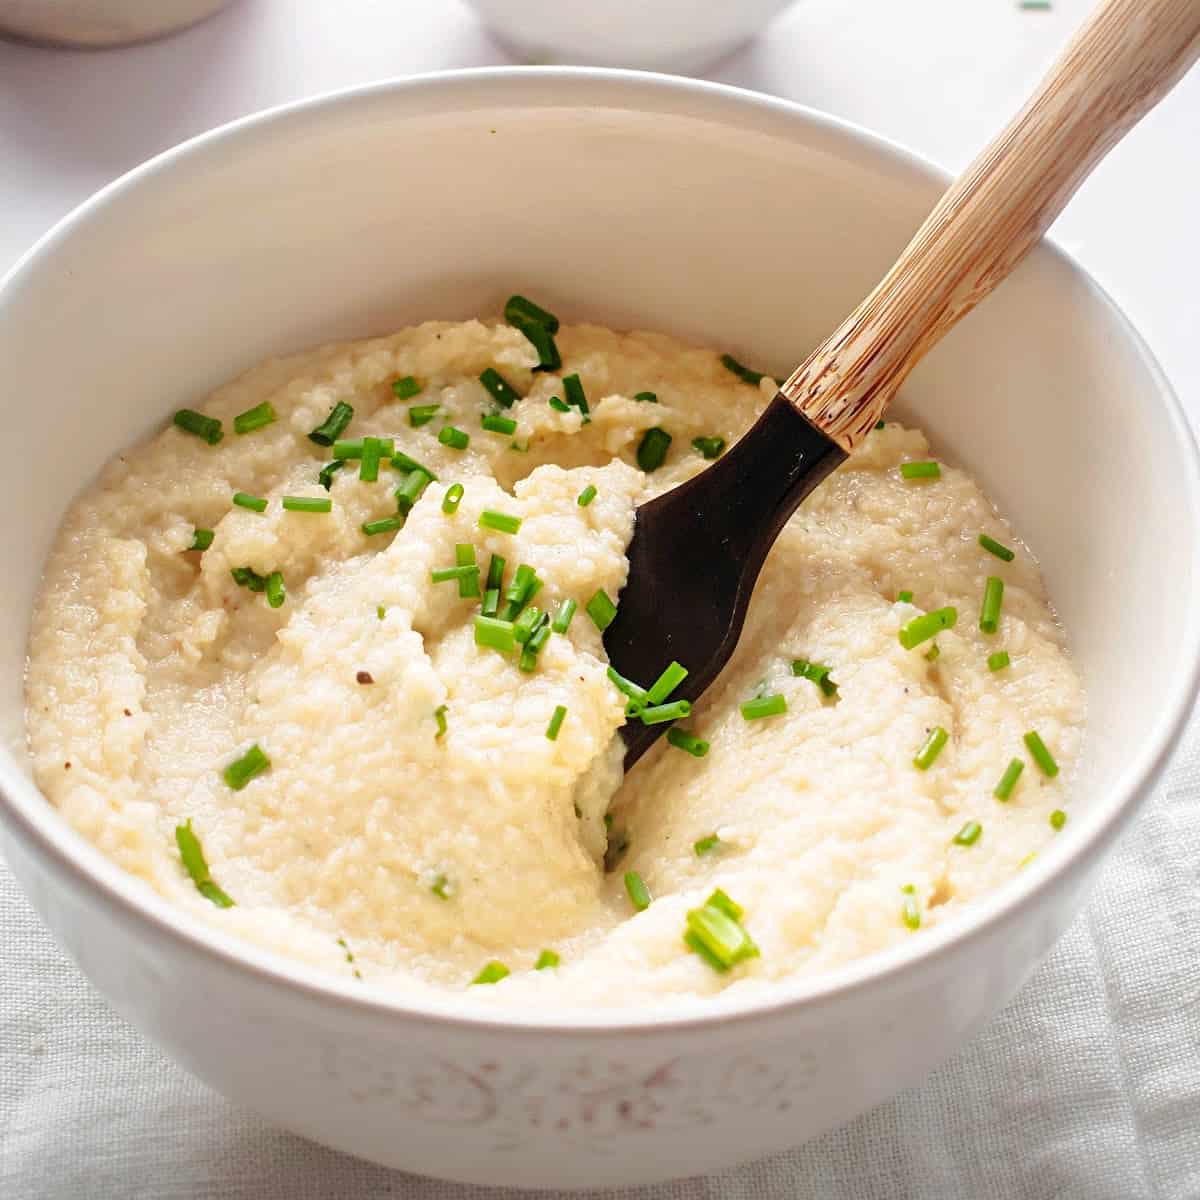 keto grits in a bowl with chives on top